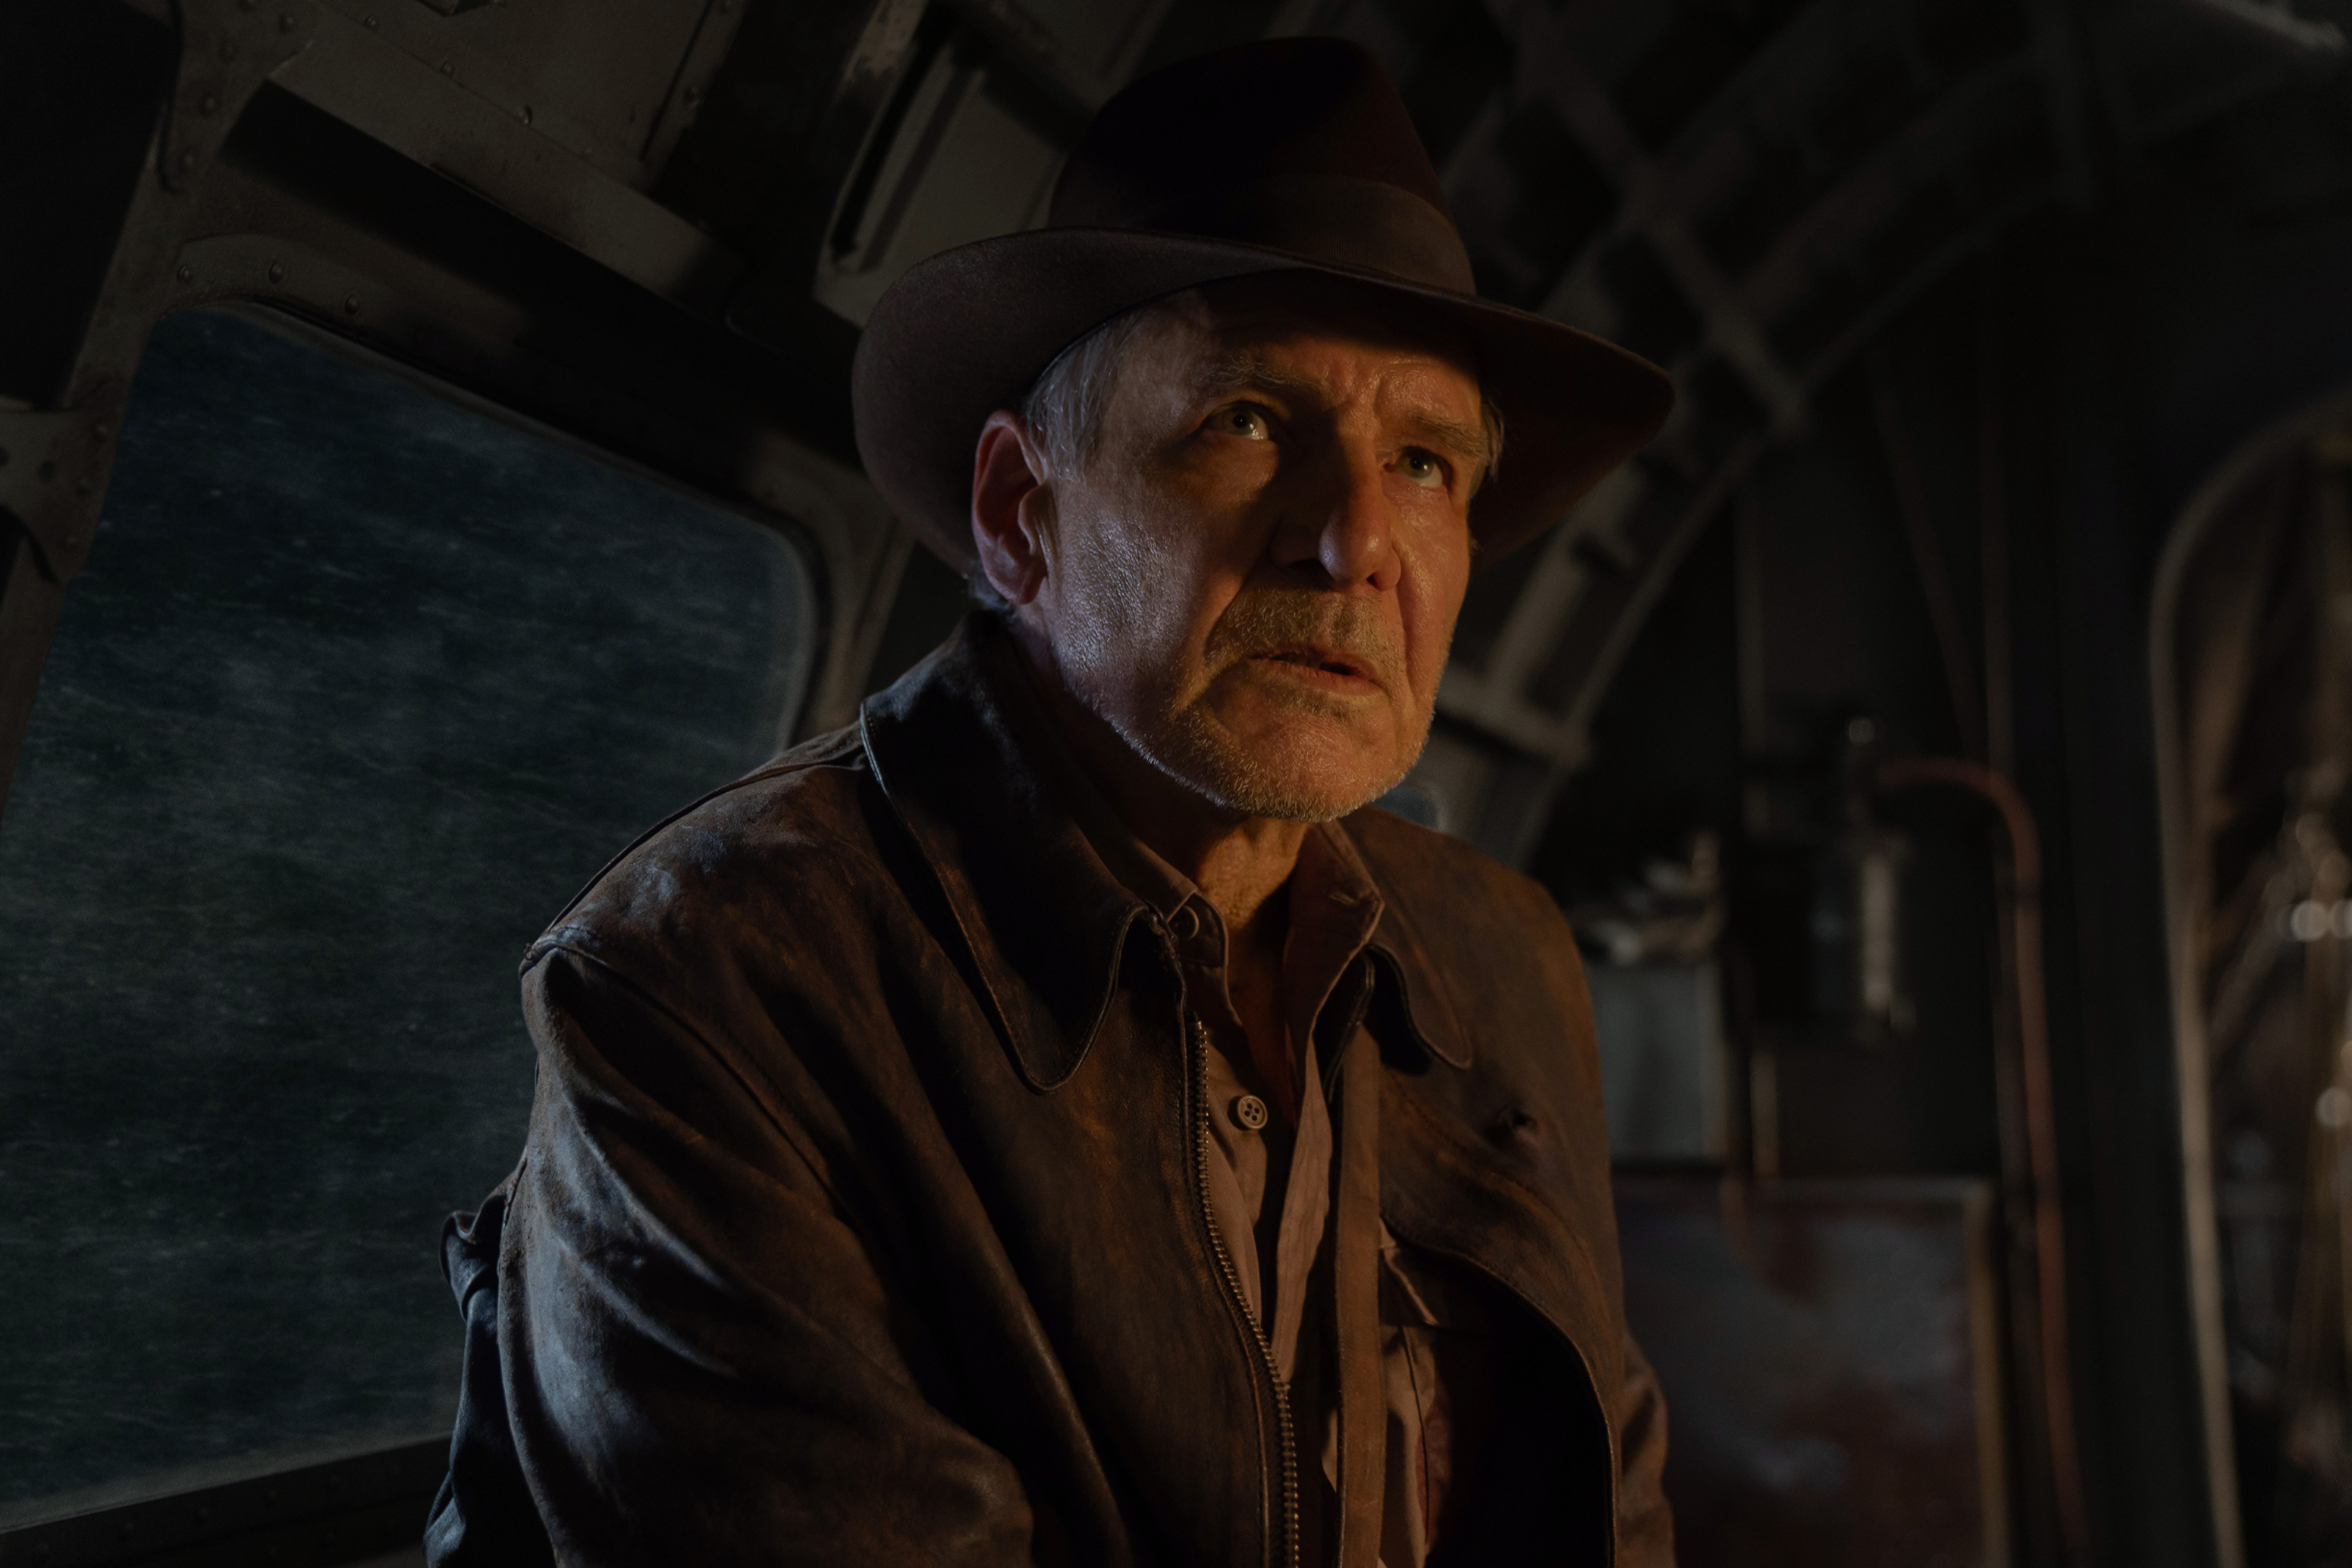 Indiana Jones and the Dial of Destiny': What to Expect